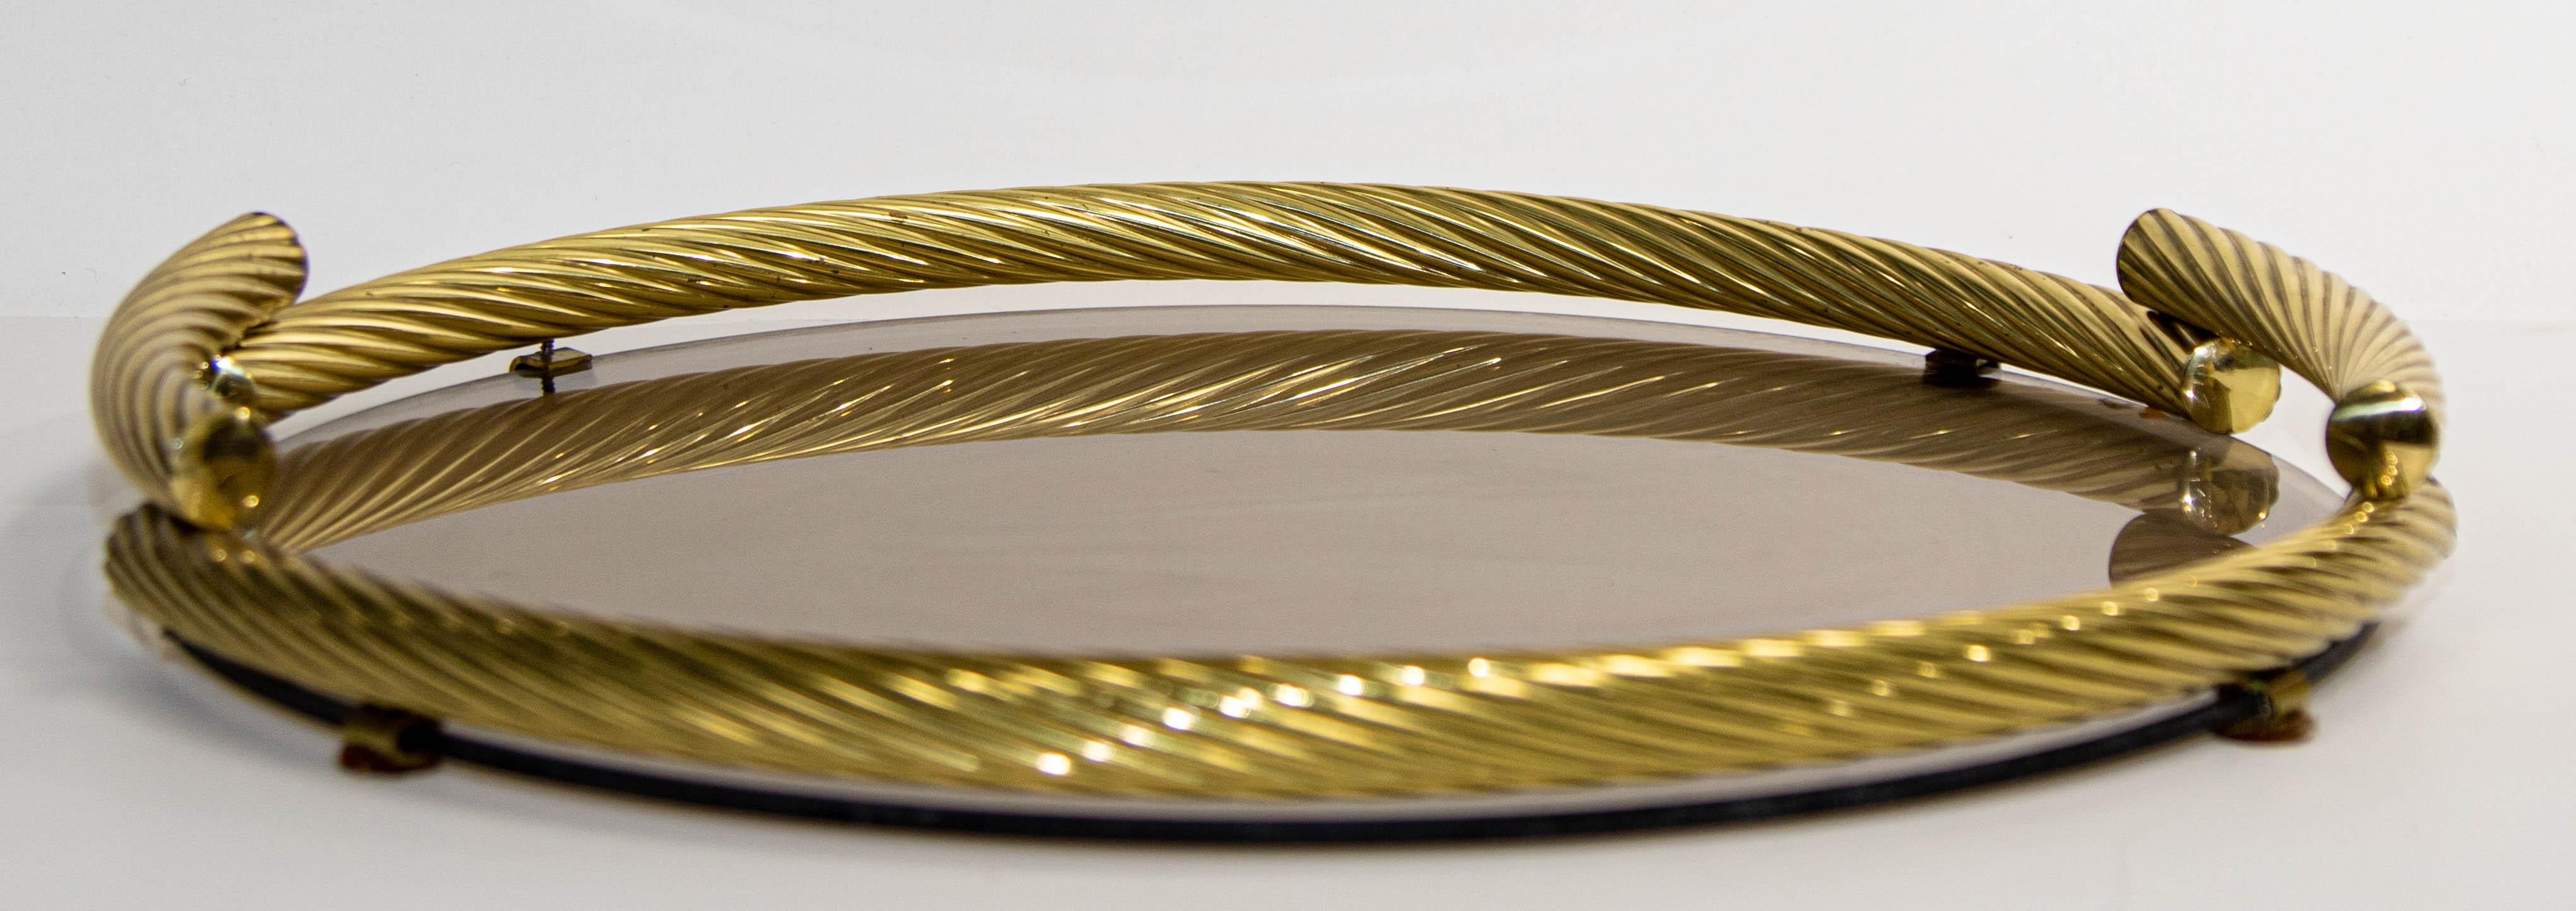 Dimart brass Italian circular brass tray with glass, 1980s.
Fabulous Post Modern gold-plated tray with smoked glass and brass golden cable rope around.
Serving Barware Tray with 24-karat Gold-Plated Brass Twist Rope Gallery Frame.
High-end Italian